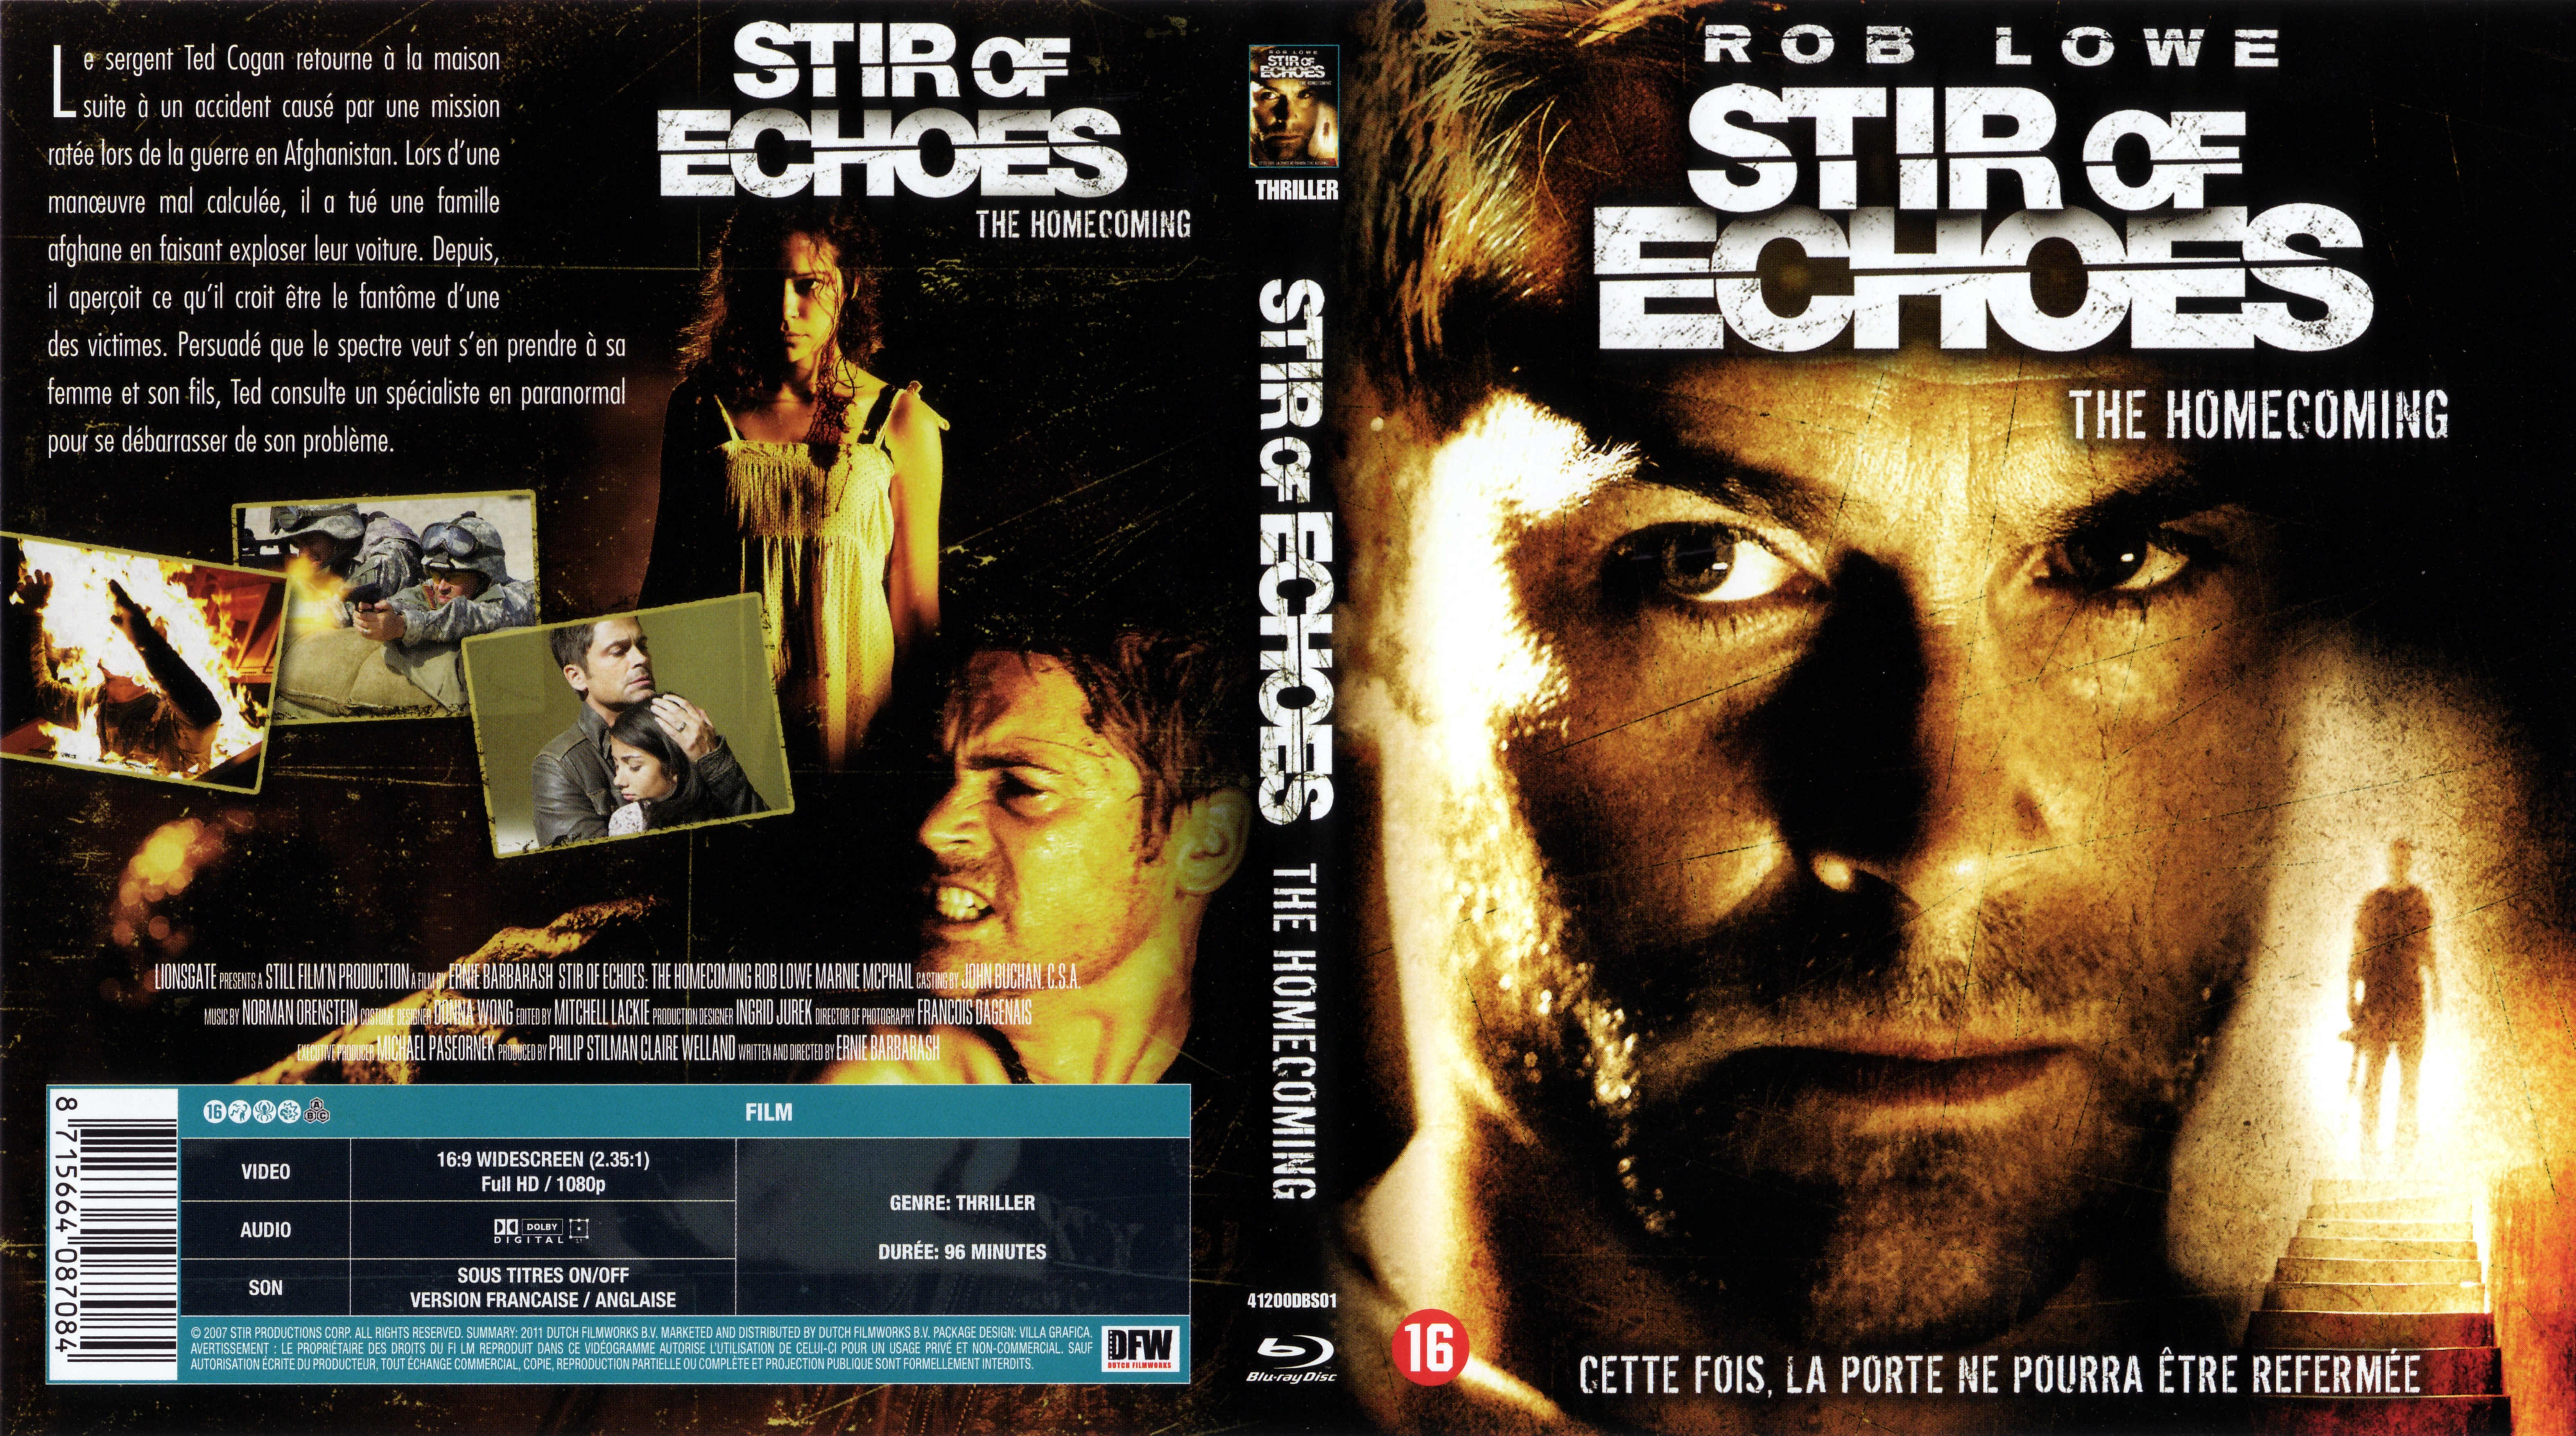 Jaquette DVD Stir Of Echoes - The home coming (BLU-RAY)